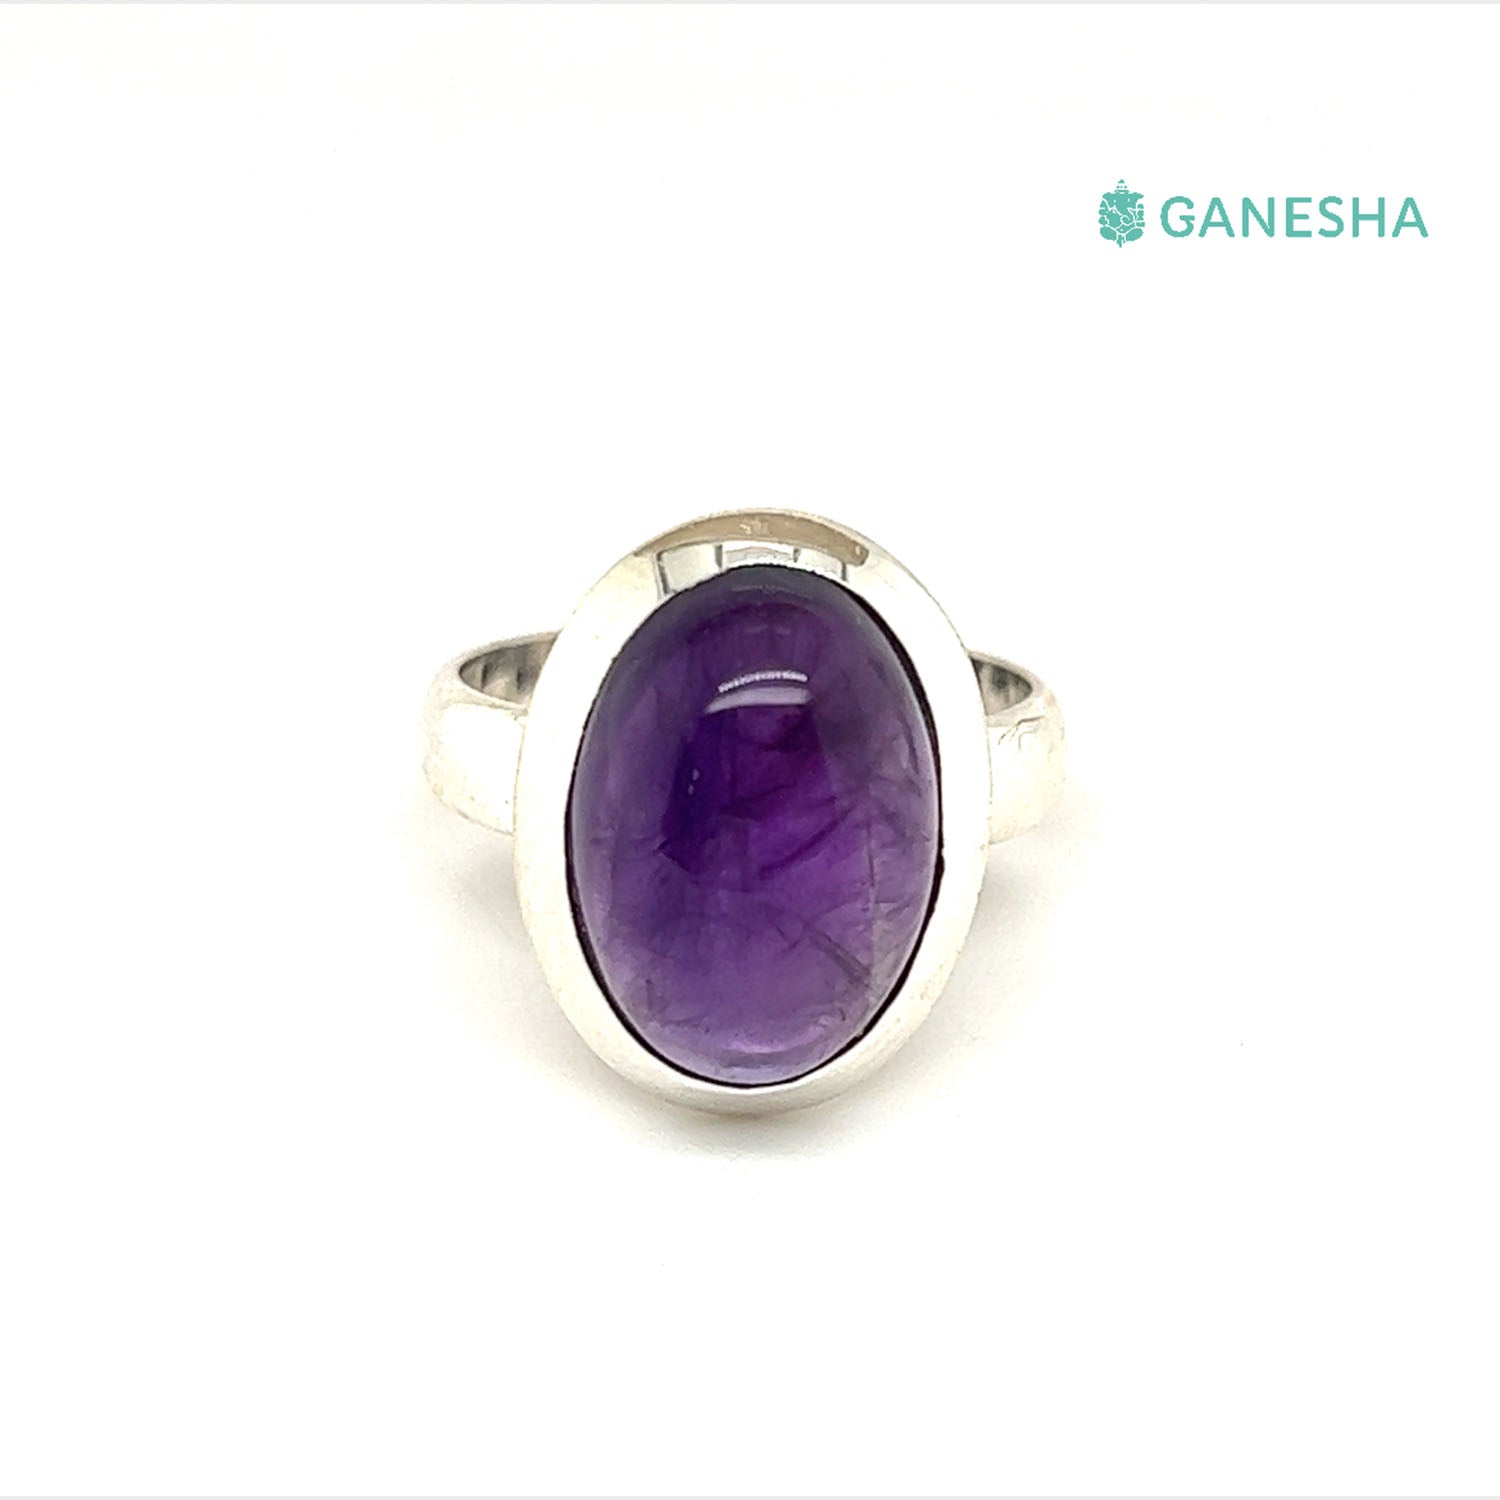 Ganesha Handicrafts, Amethyst Cabochon , 925 Sterling Silver jewellery Gift Set With Free Chain,  Amethyst Cabochon , 925 Sterling Silver jewellery Chain, 925 Sterling Silver jewellery , Womens - 925 Sterling Silver jewellery Gift Set With Free Chain, Fashion- 925 Sterling Silver jewellery Gift Set With Free Chain, Trending Womens Jewellery Gift, 925 Sterling Silver. 